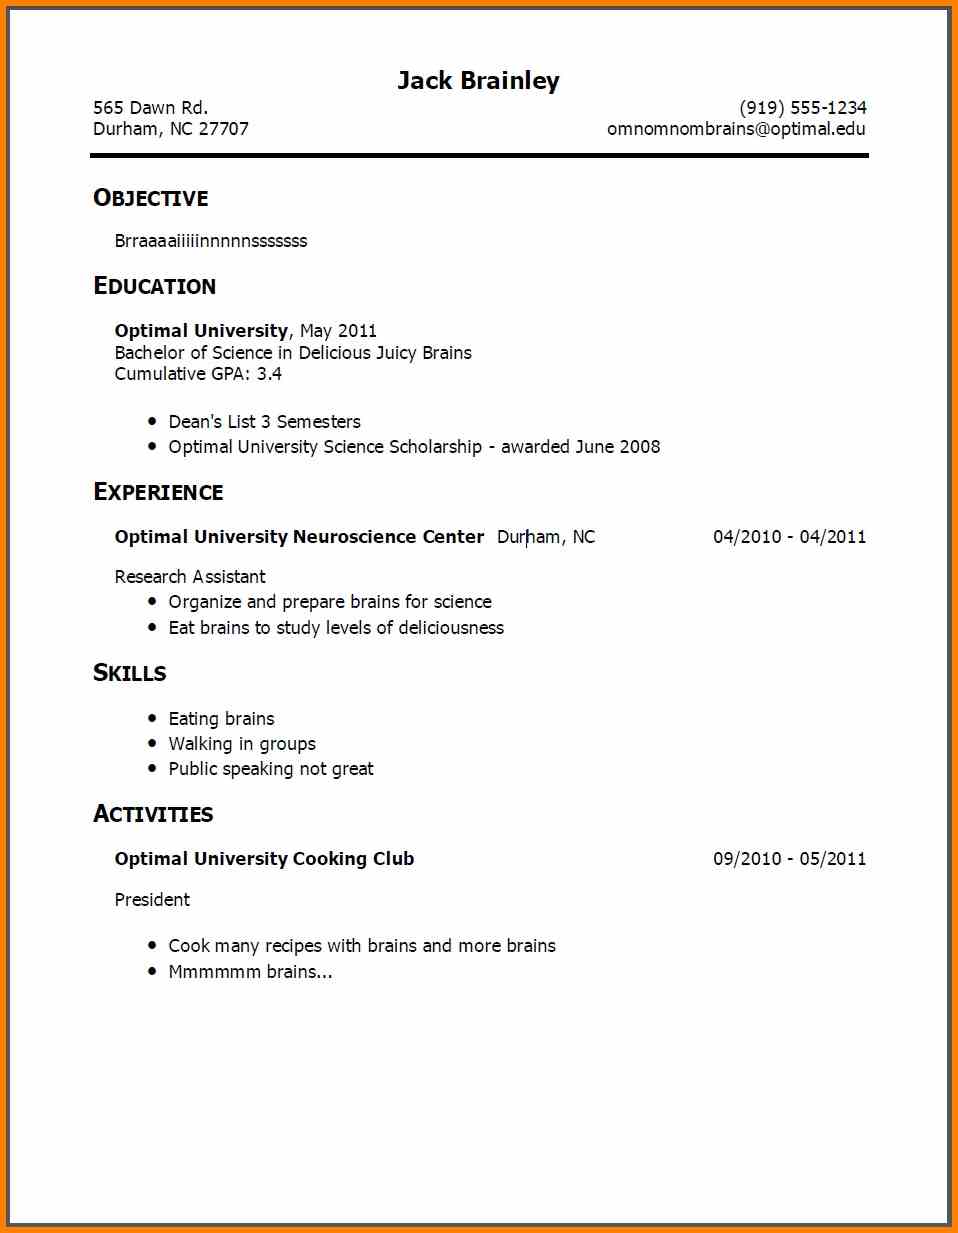 Resume Examples For Jobs First Time Resume Examples With No Experience How To Make A Resume For Job With No Employment Education Skills Graphic Diagram Work Experience Templates For Pages Examples Me resume examples for jobs|wikiresume.com